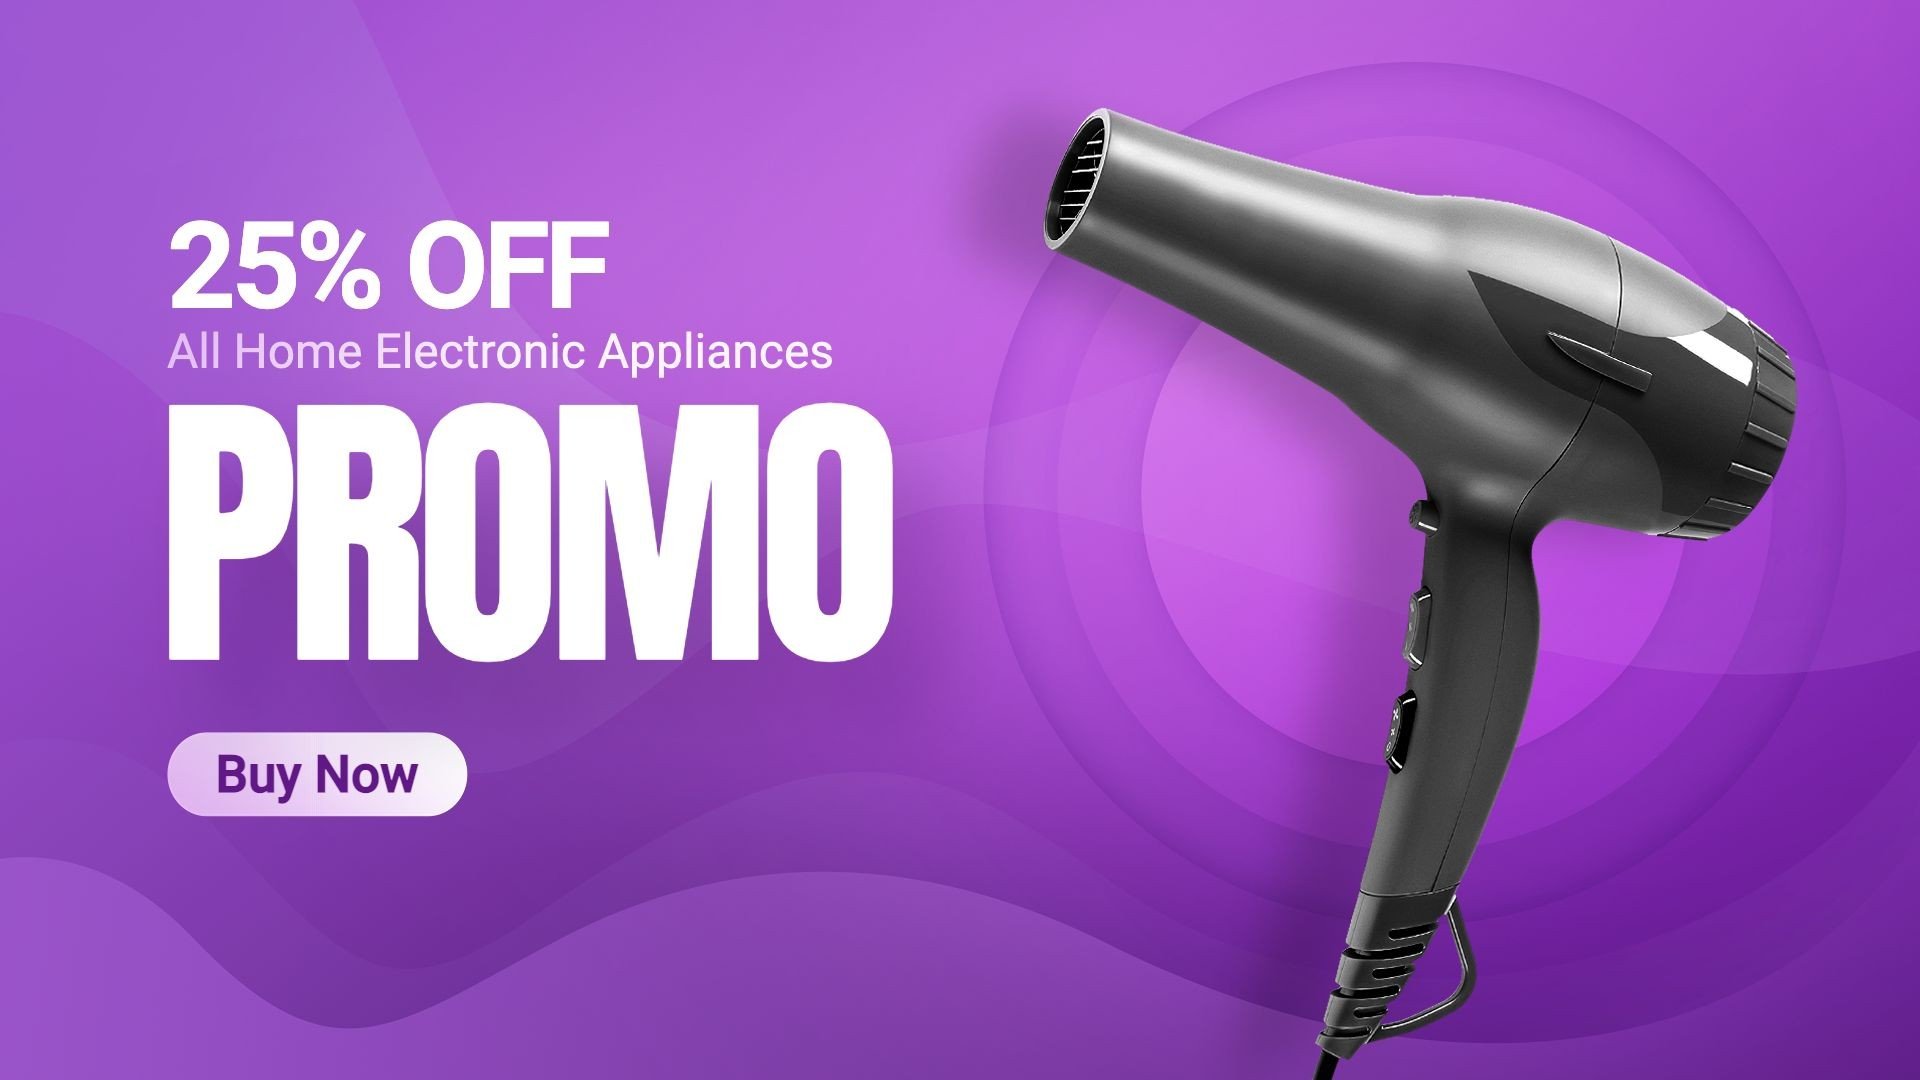 Purple System Hair Dryer Home Electronic Appliance Discount Sale Promo Ecommerce Banner预览效果